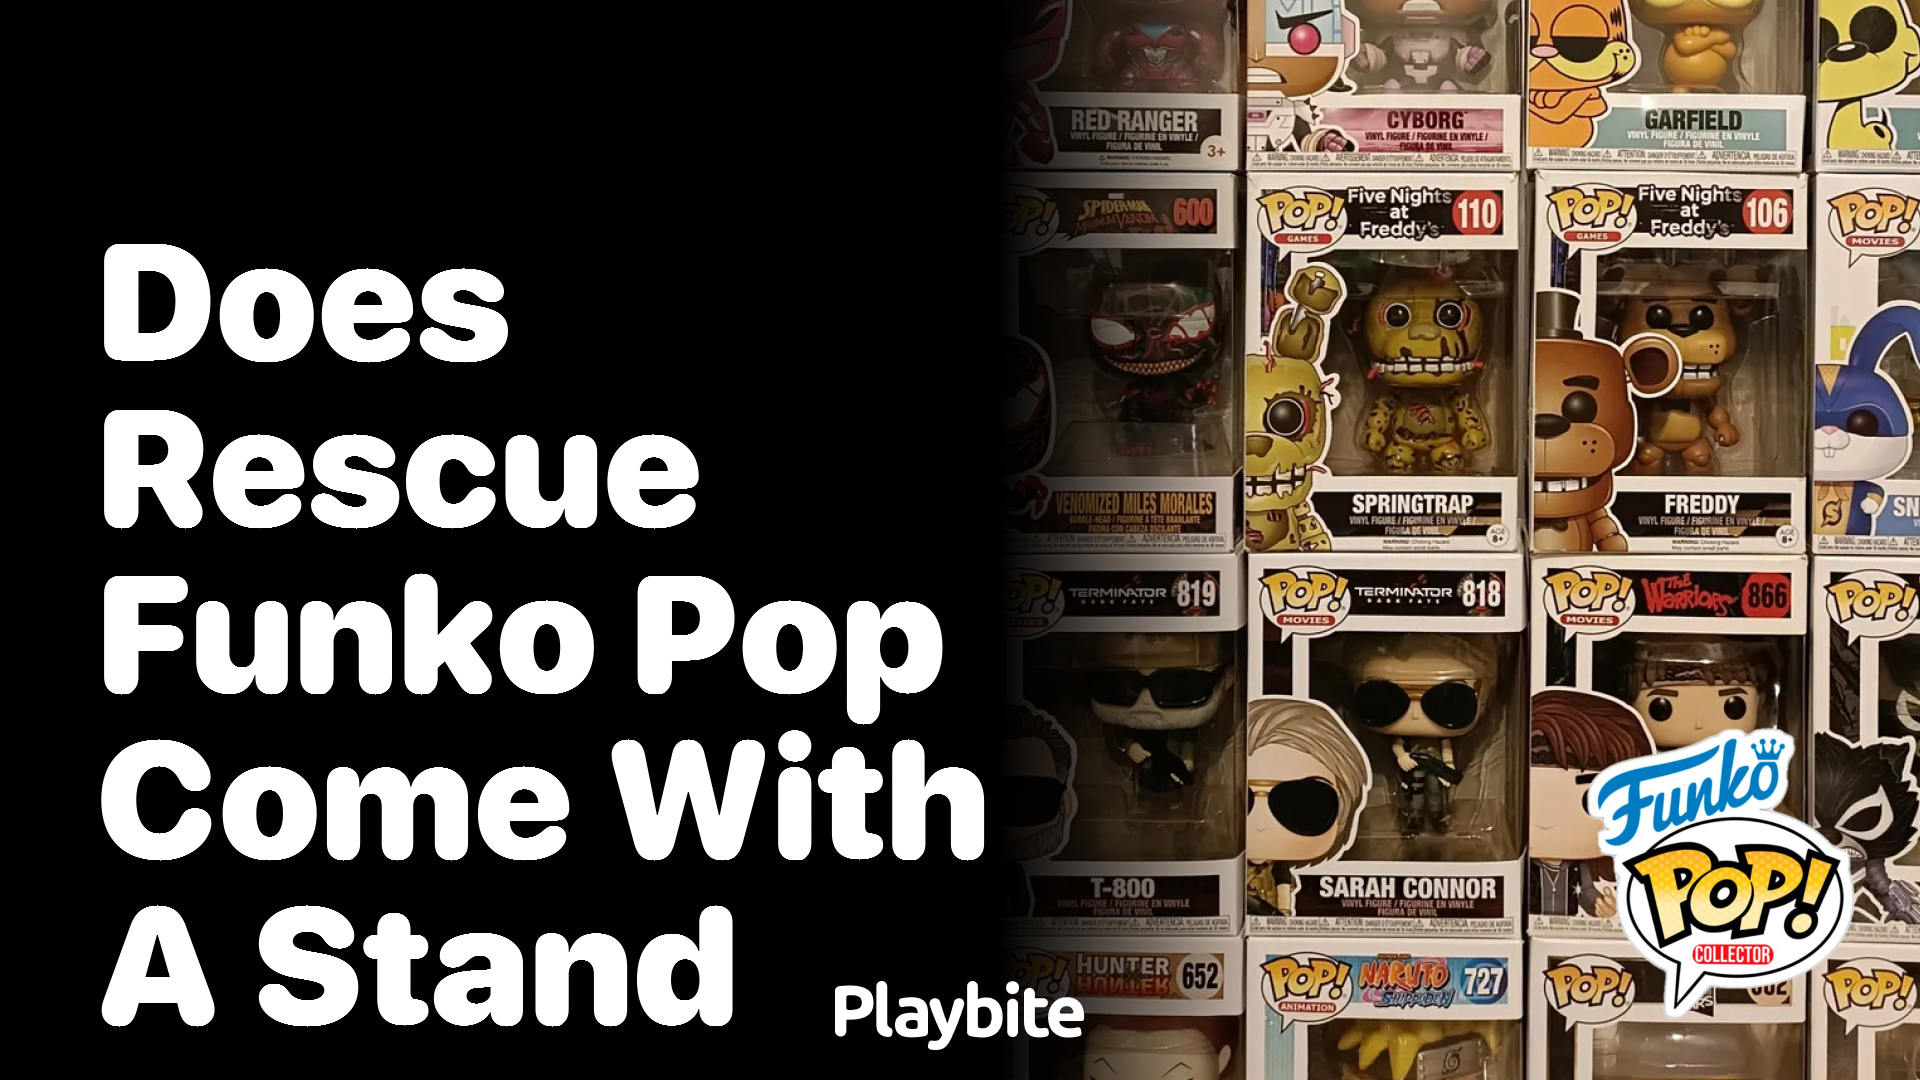 Does Rescue Funko Pop come with a stand?